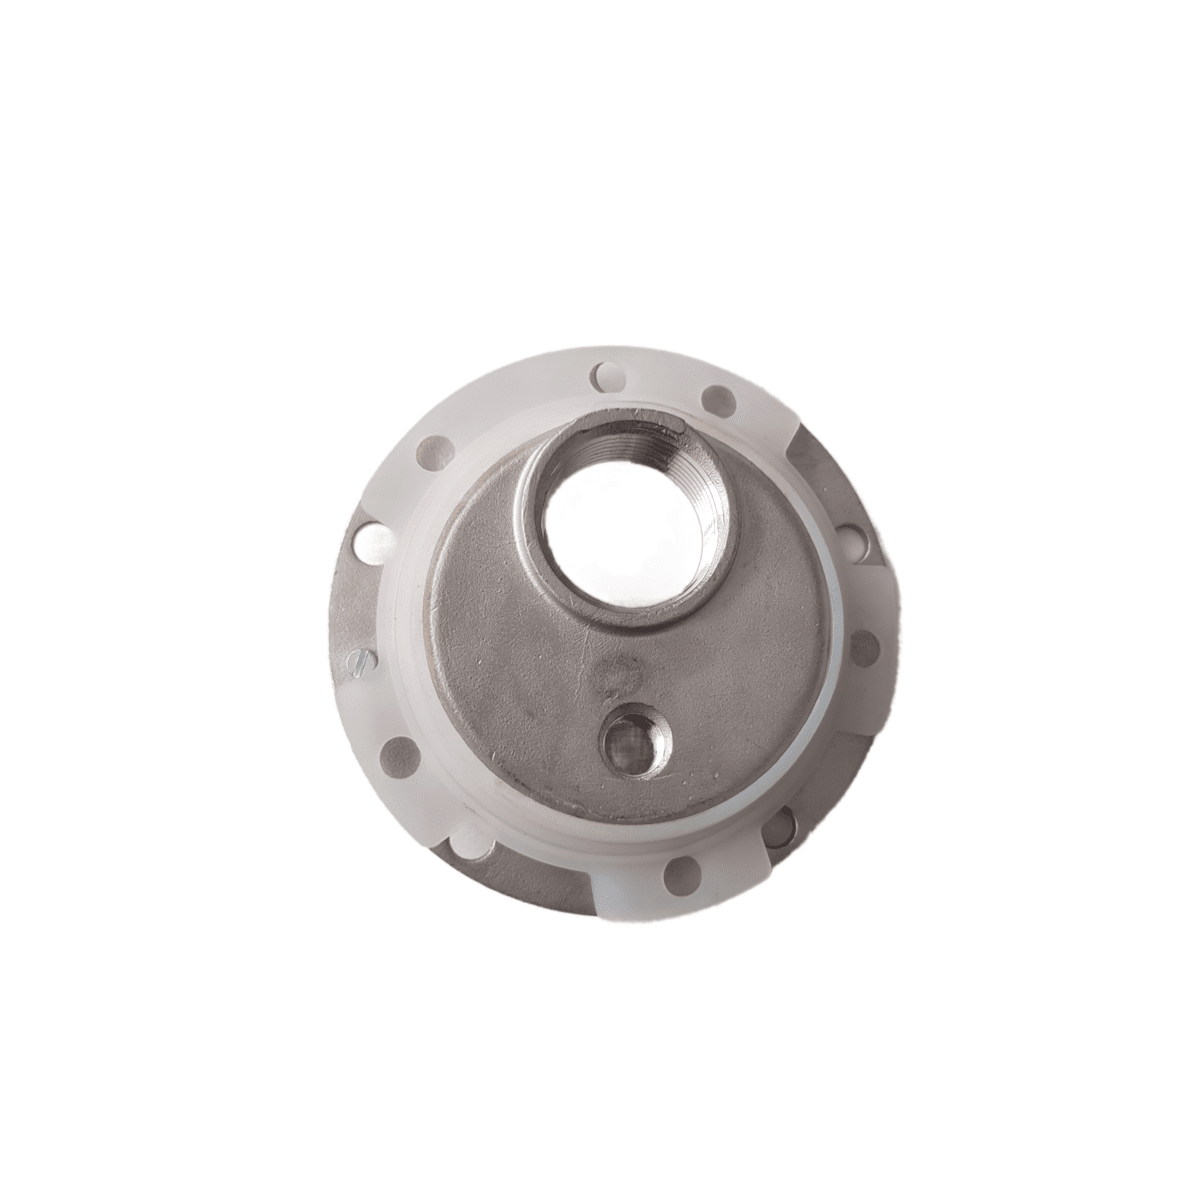 Geyserwise Stainless Steel 5 Hole Flange